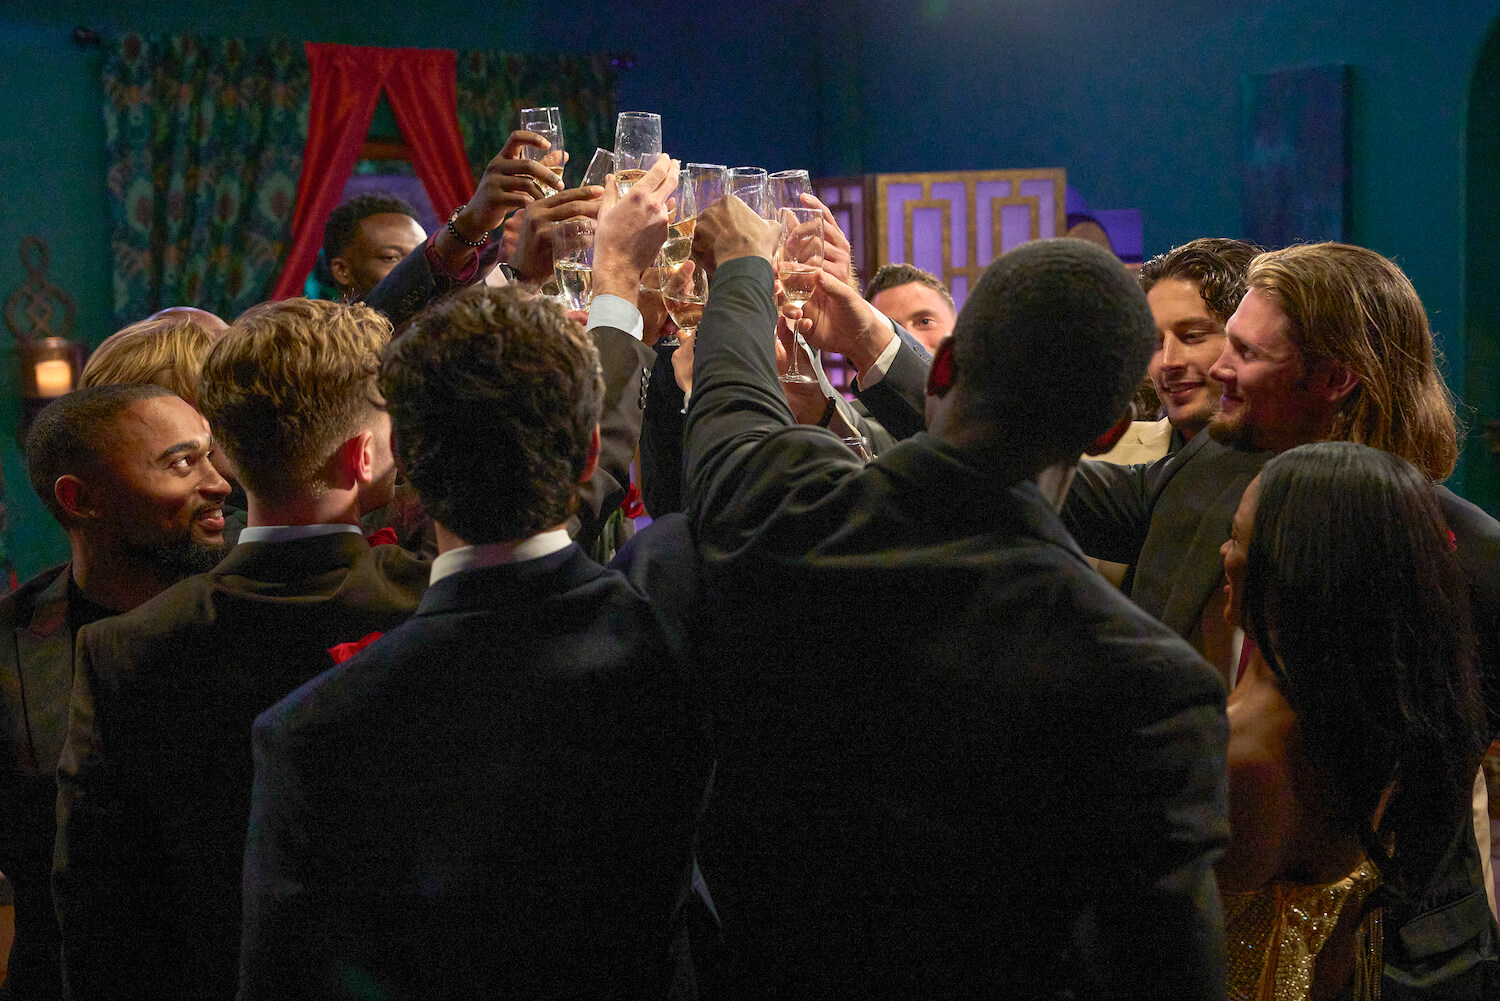 'The Bachelorette' 2023 cast members toasting with their arms raised holding glasses